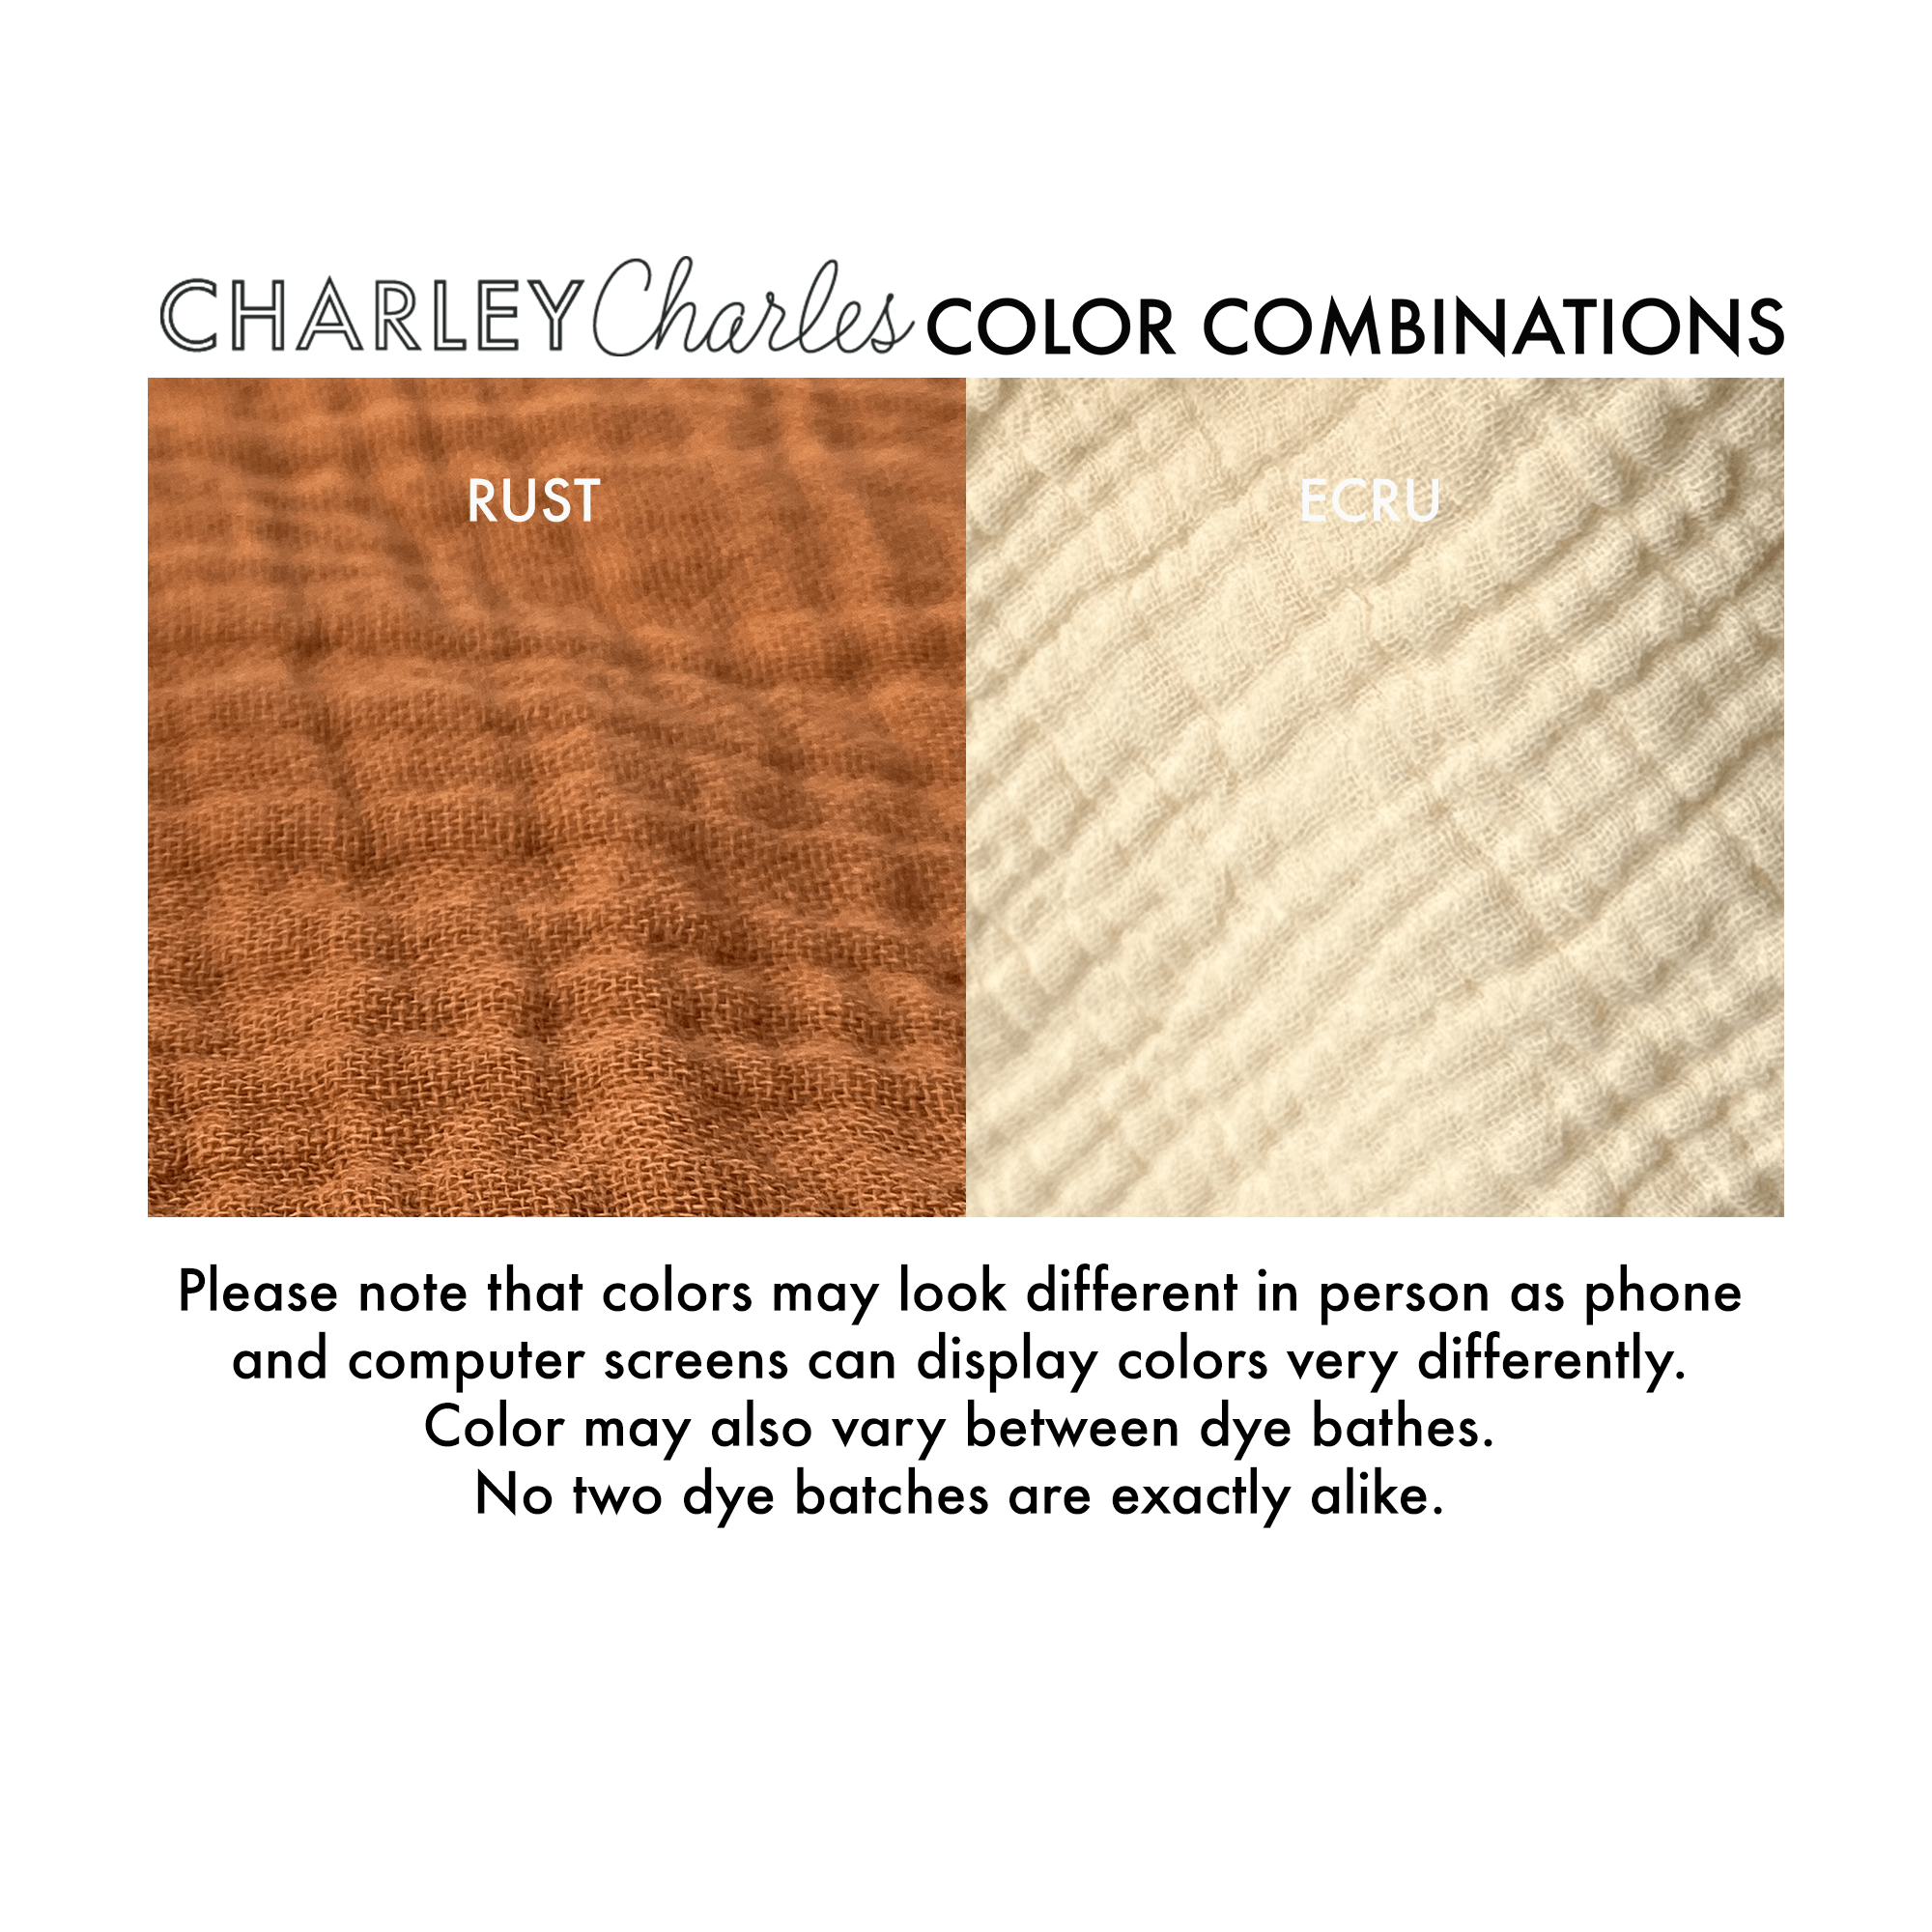 4 Layer Cotton Gauze Blanket - SMALL 32 X 39 / MORE COLORS AVAILABLE - Charley Charles